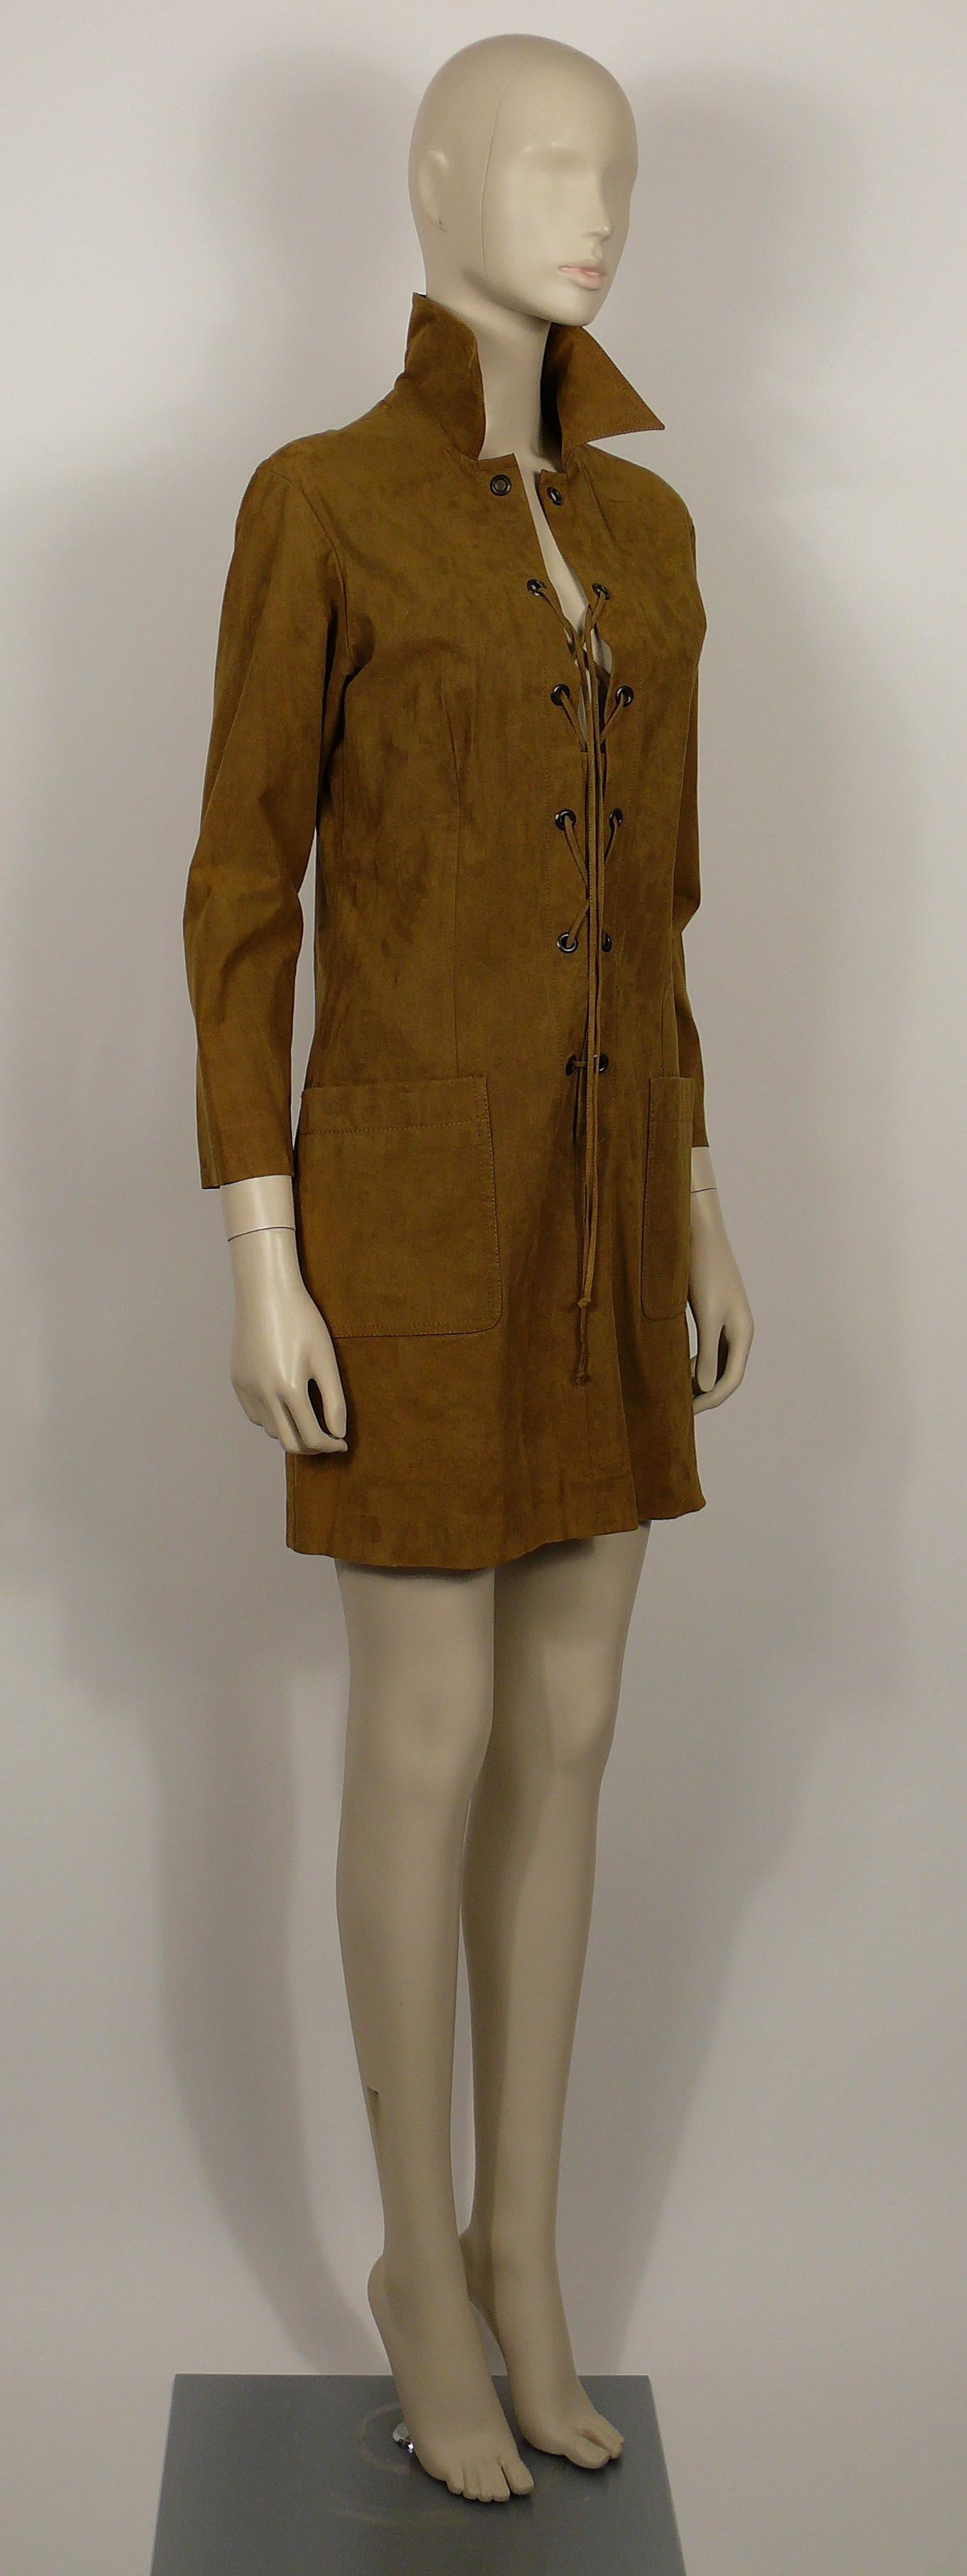 YVES SAINT LAURENT VARIATION vintage iconic brown SAFARI dress.

This dress features :
- Probably brown faux-suede fabric (missing composition label).
- Lace-up front construction with metal eyelets and matching rope.
- 2 front pockets.
- 3/4